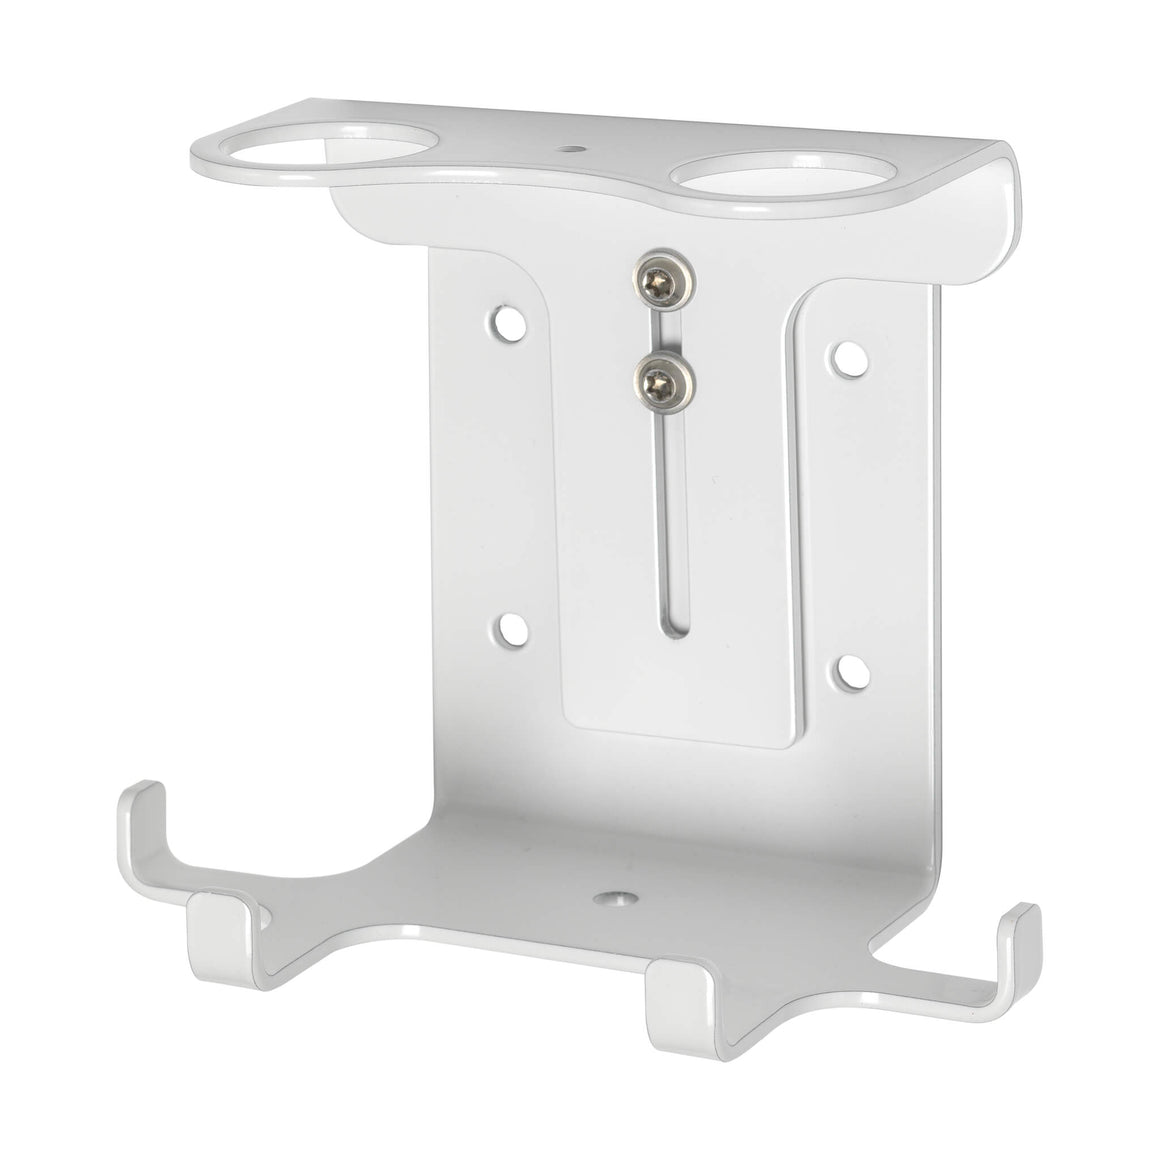 Double 500ml Security Wall-Mounted Holder - Satin White